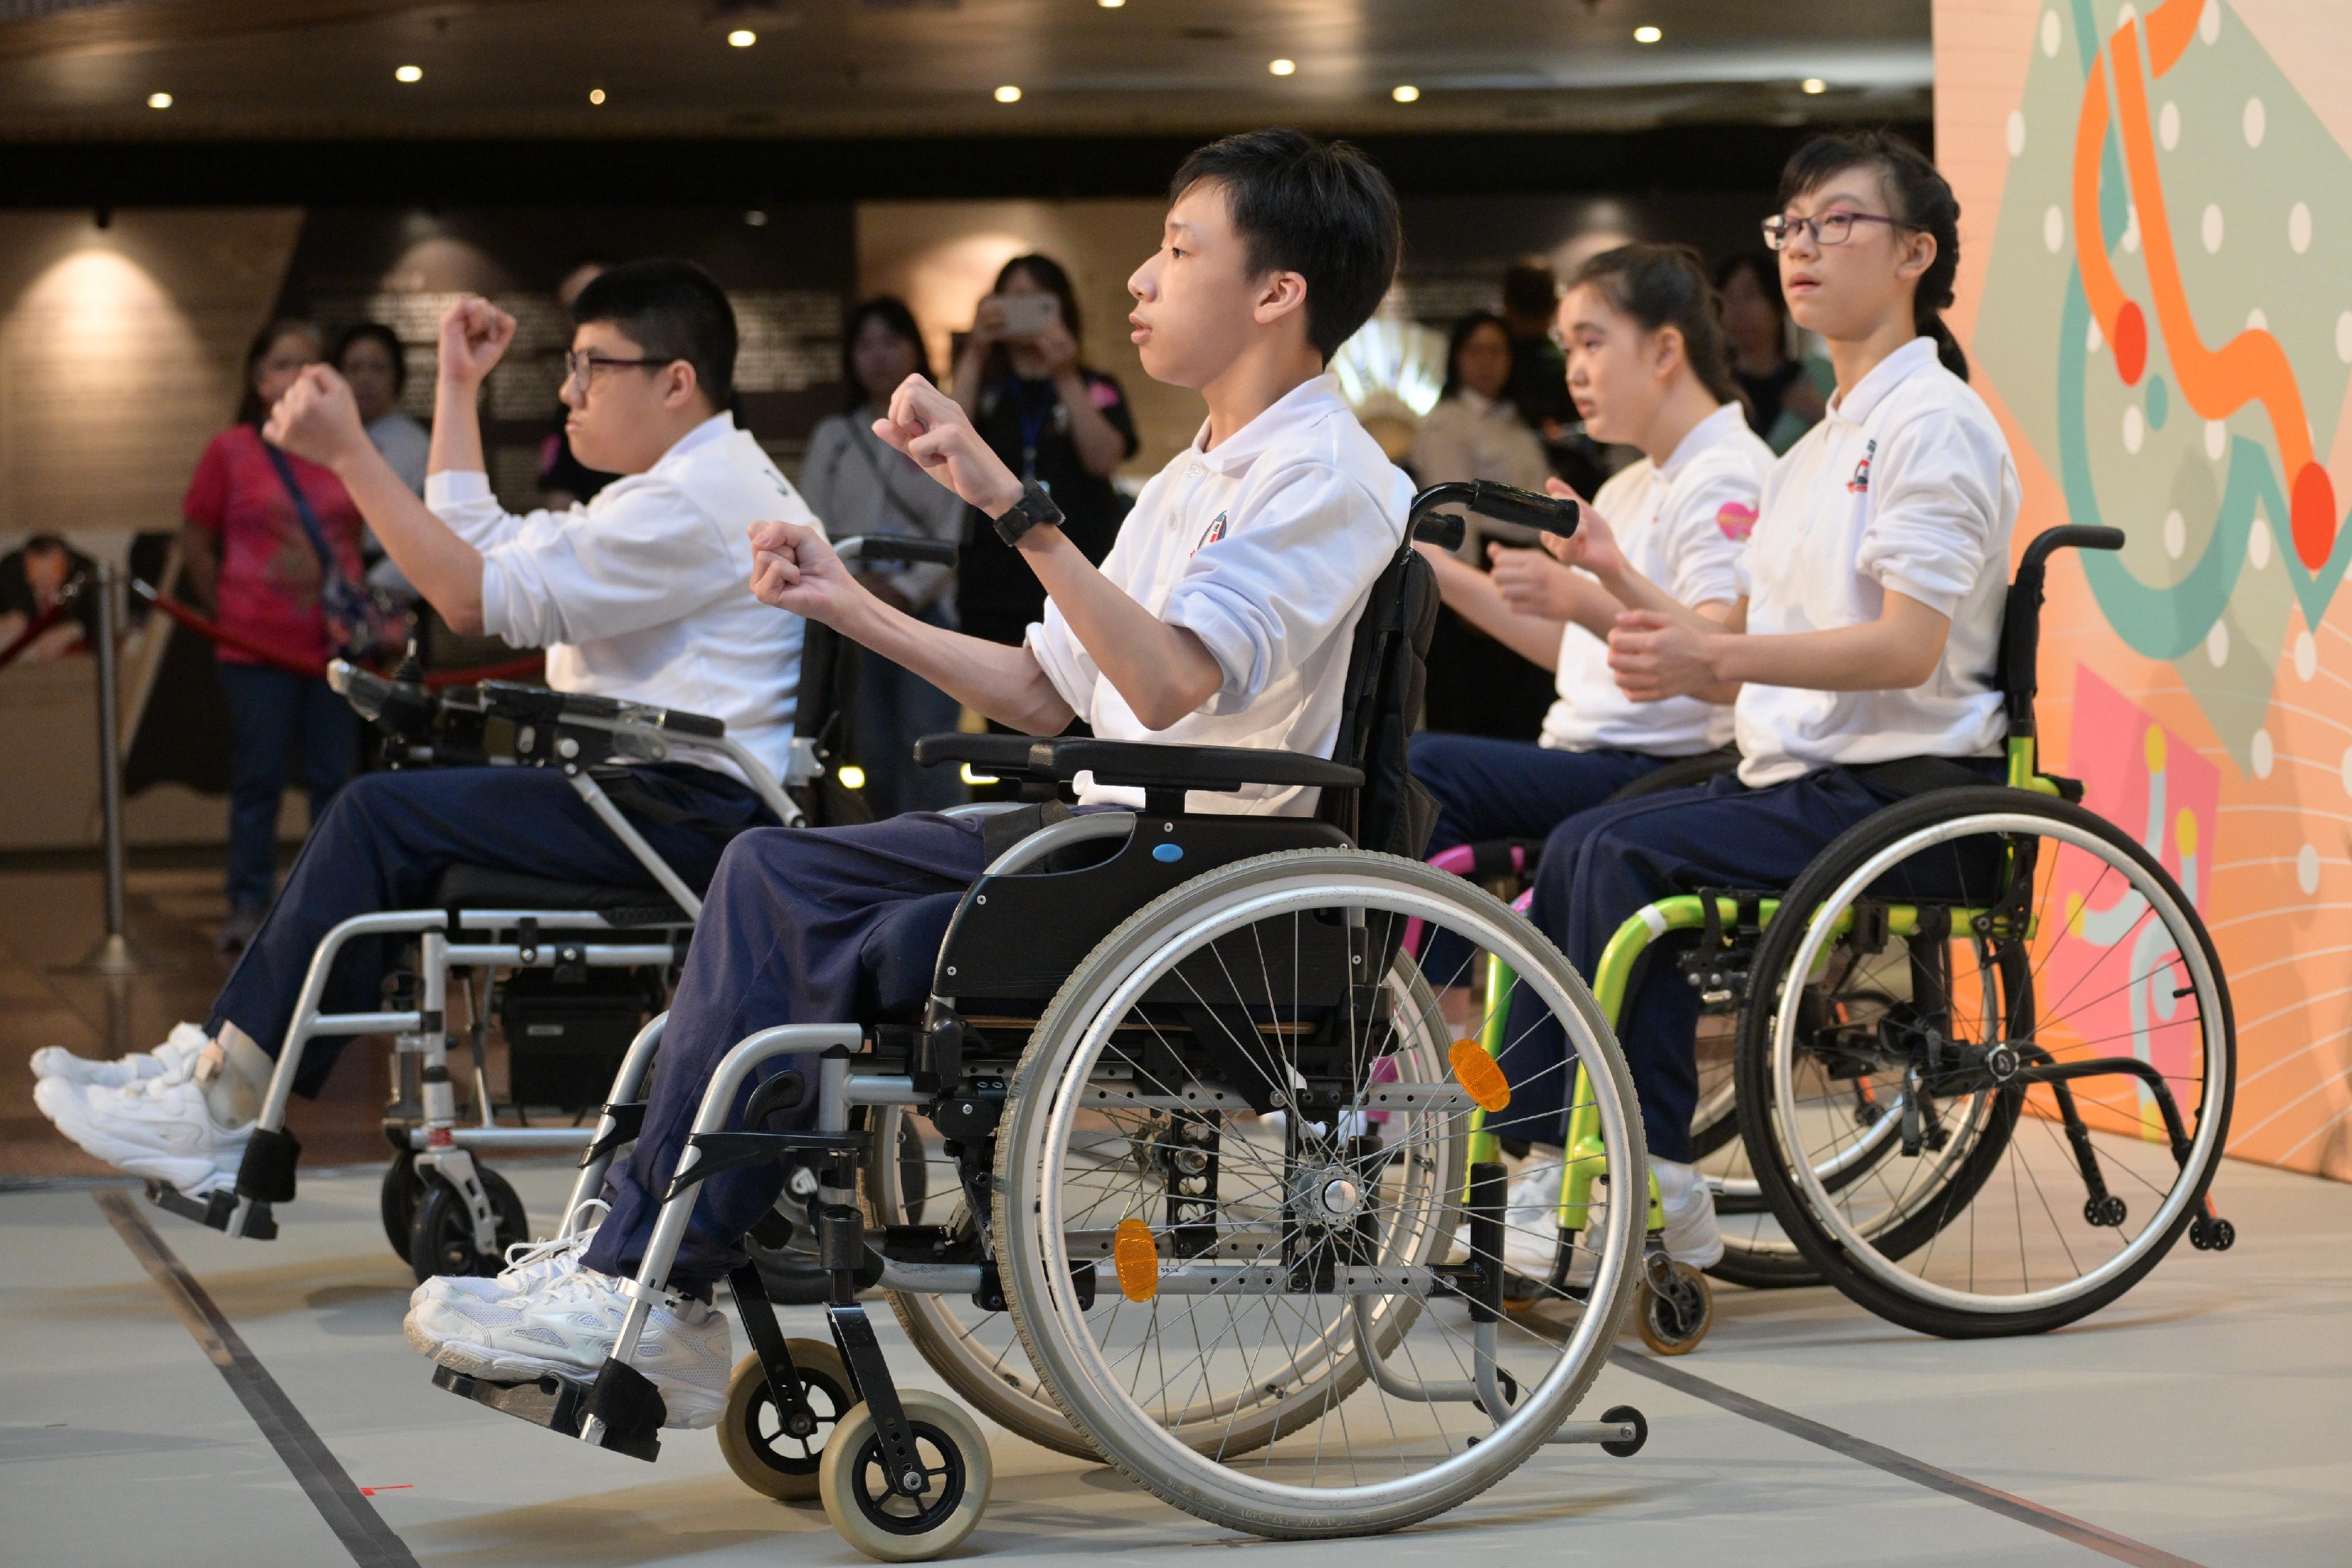 The "Dance for All" Community Care Inclusive Dance Scheme, organised by the Leisure and Cultural Services Department, was launched today (May 5). Photo shows persons with physical disabilities in action at the "Dance with Me" inclusive performance.
